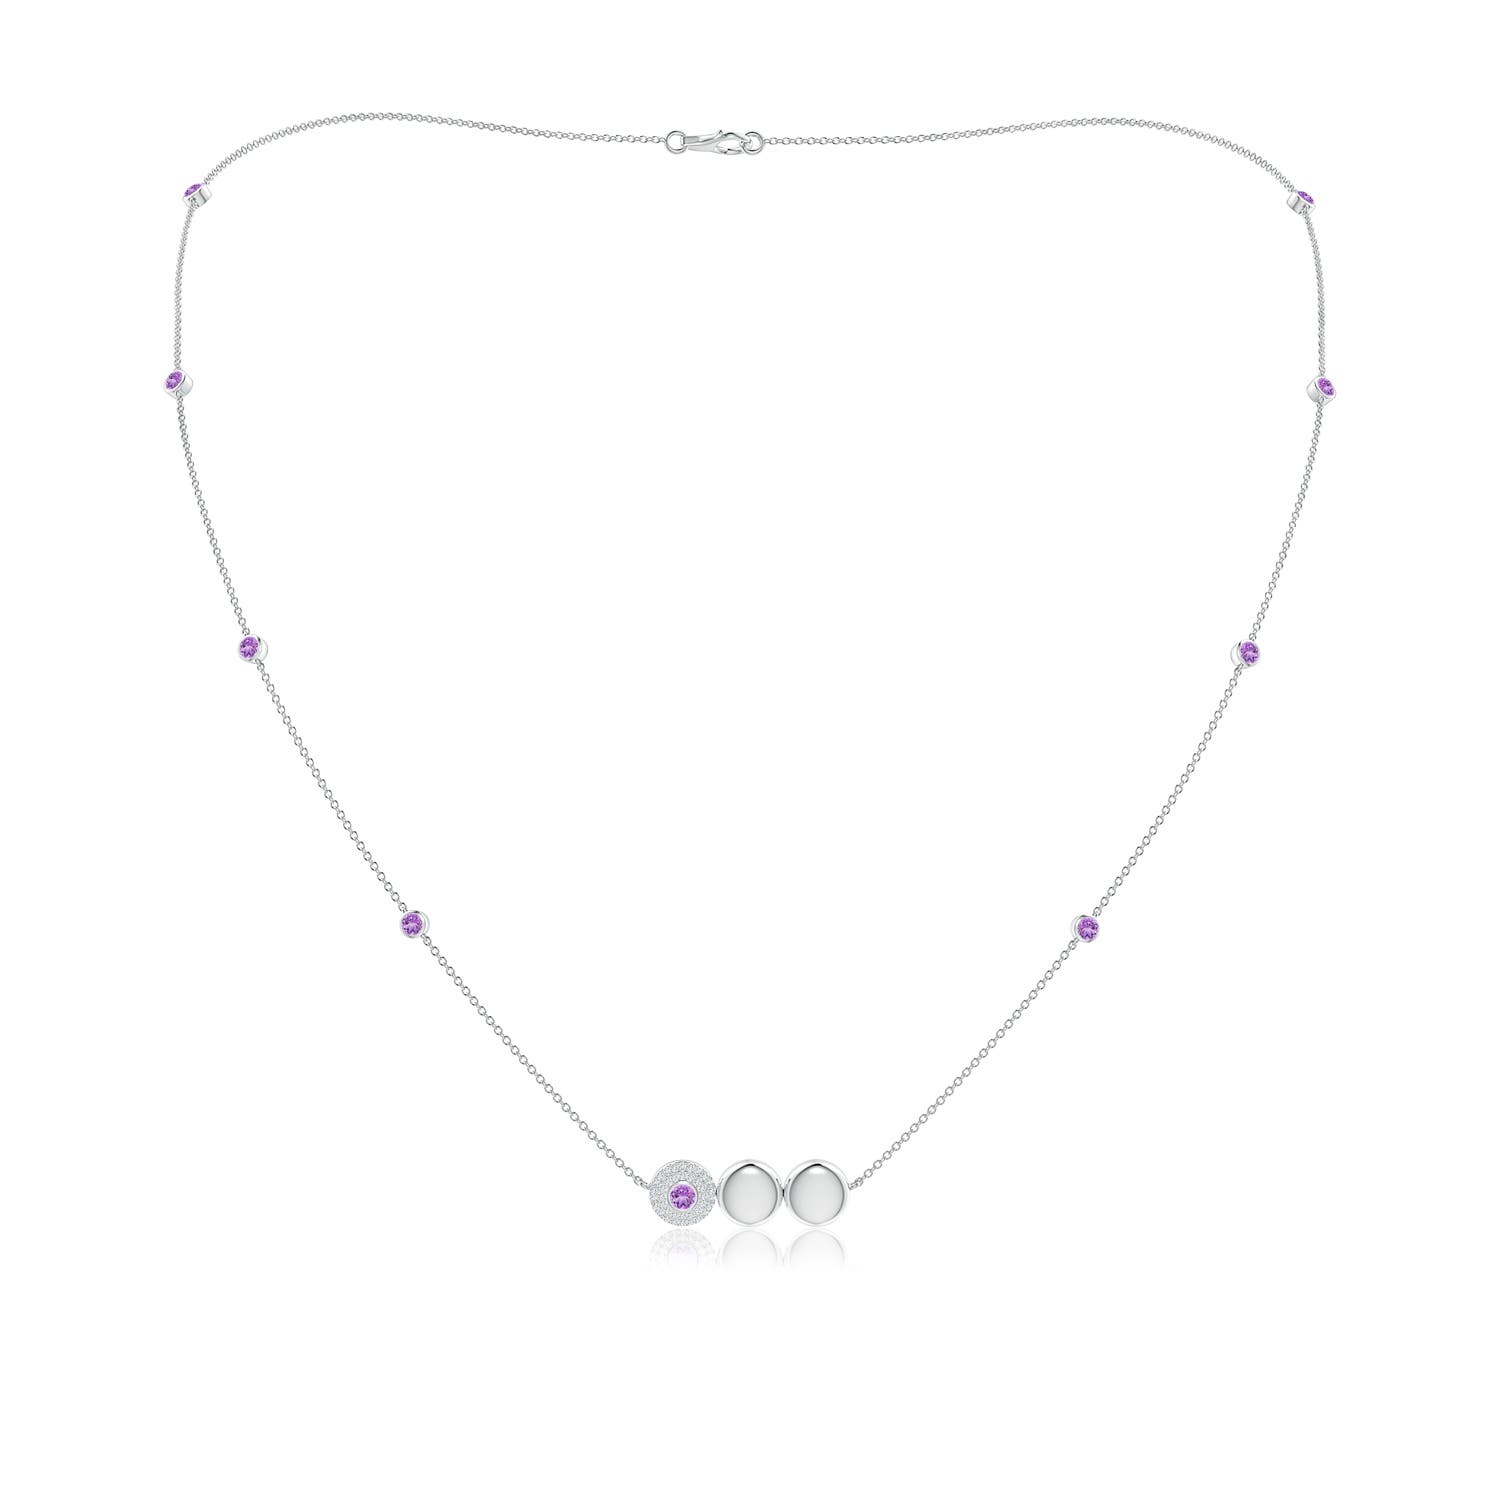 AAA - Amethyst / 1.09 CT / 14 KT White Gold